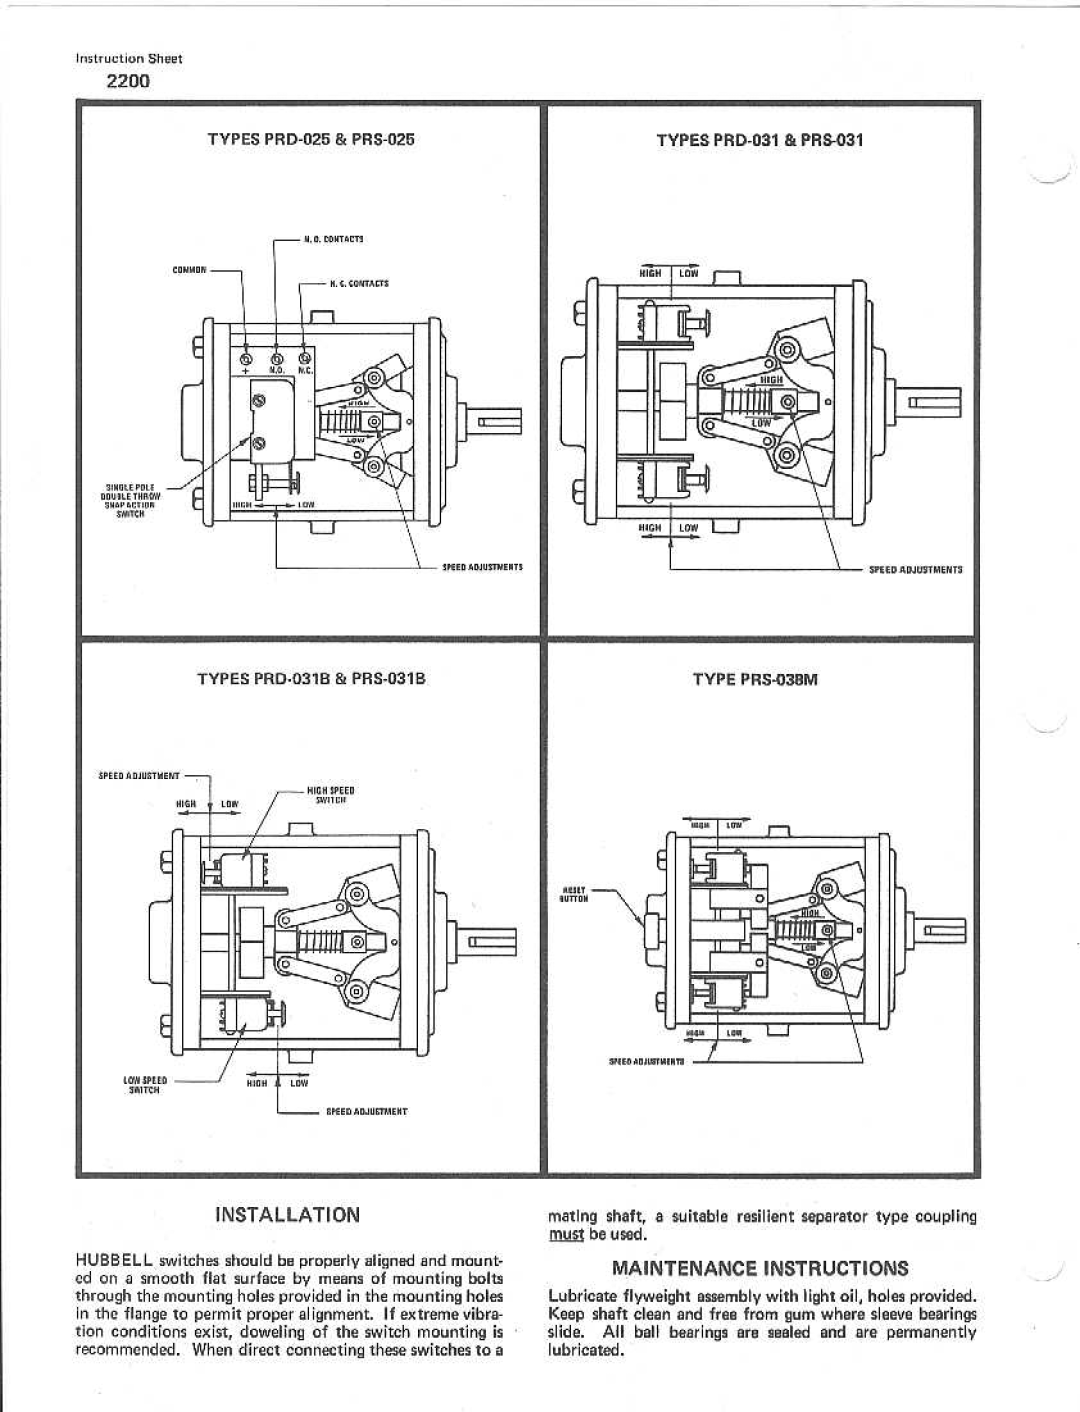 Hubbell 2200 manual 